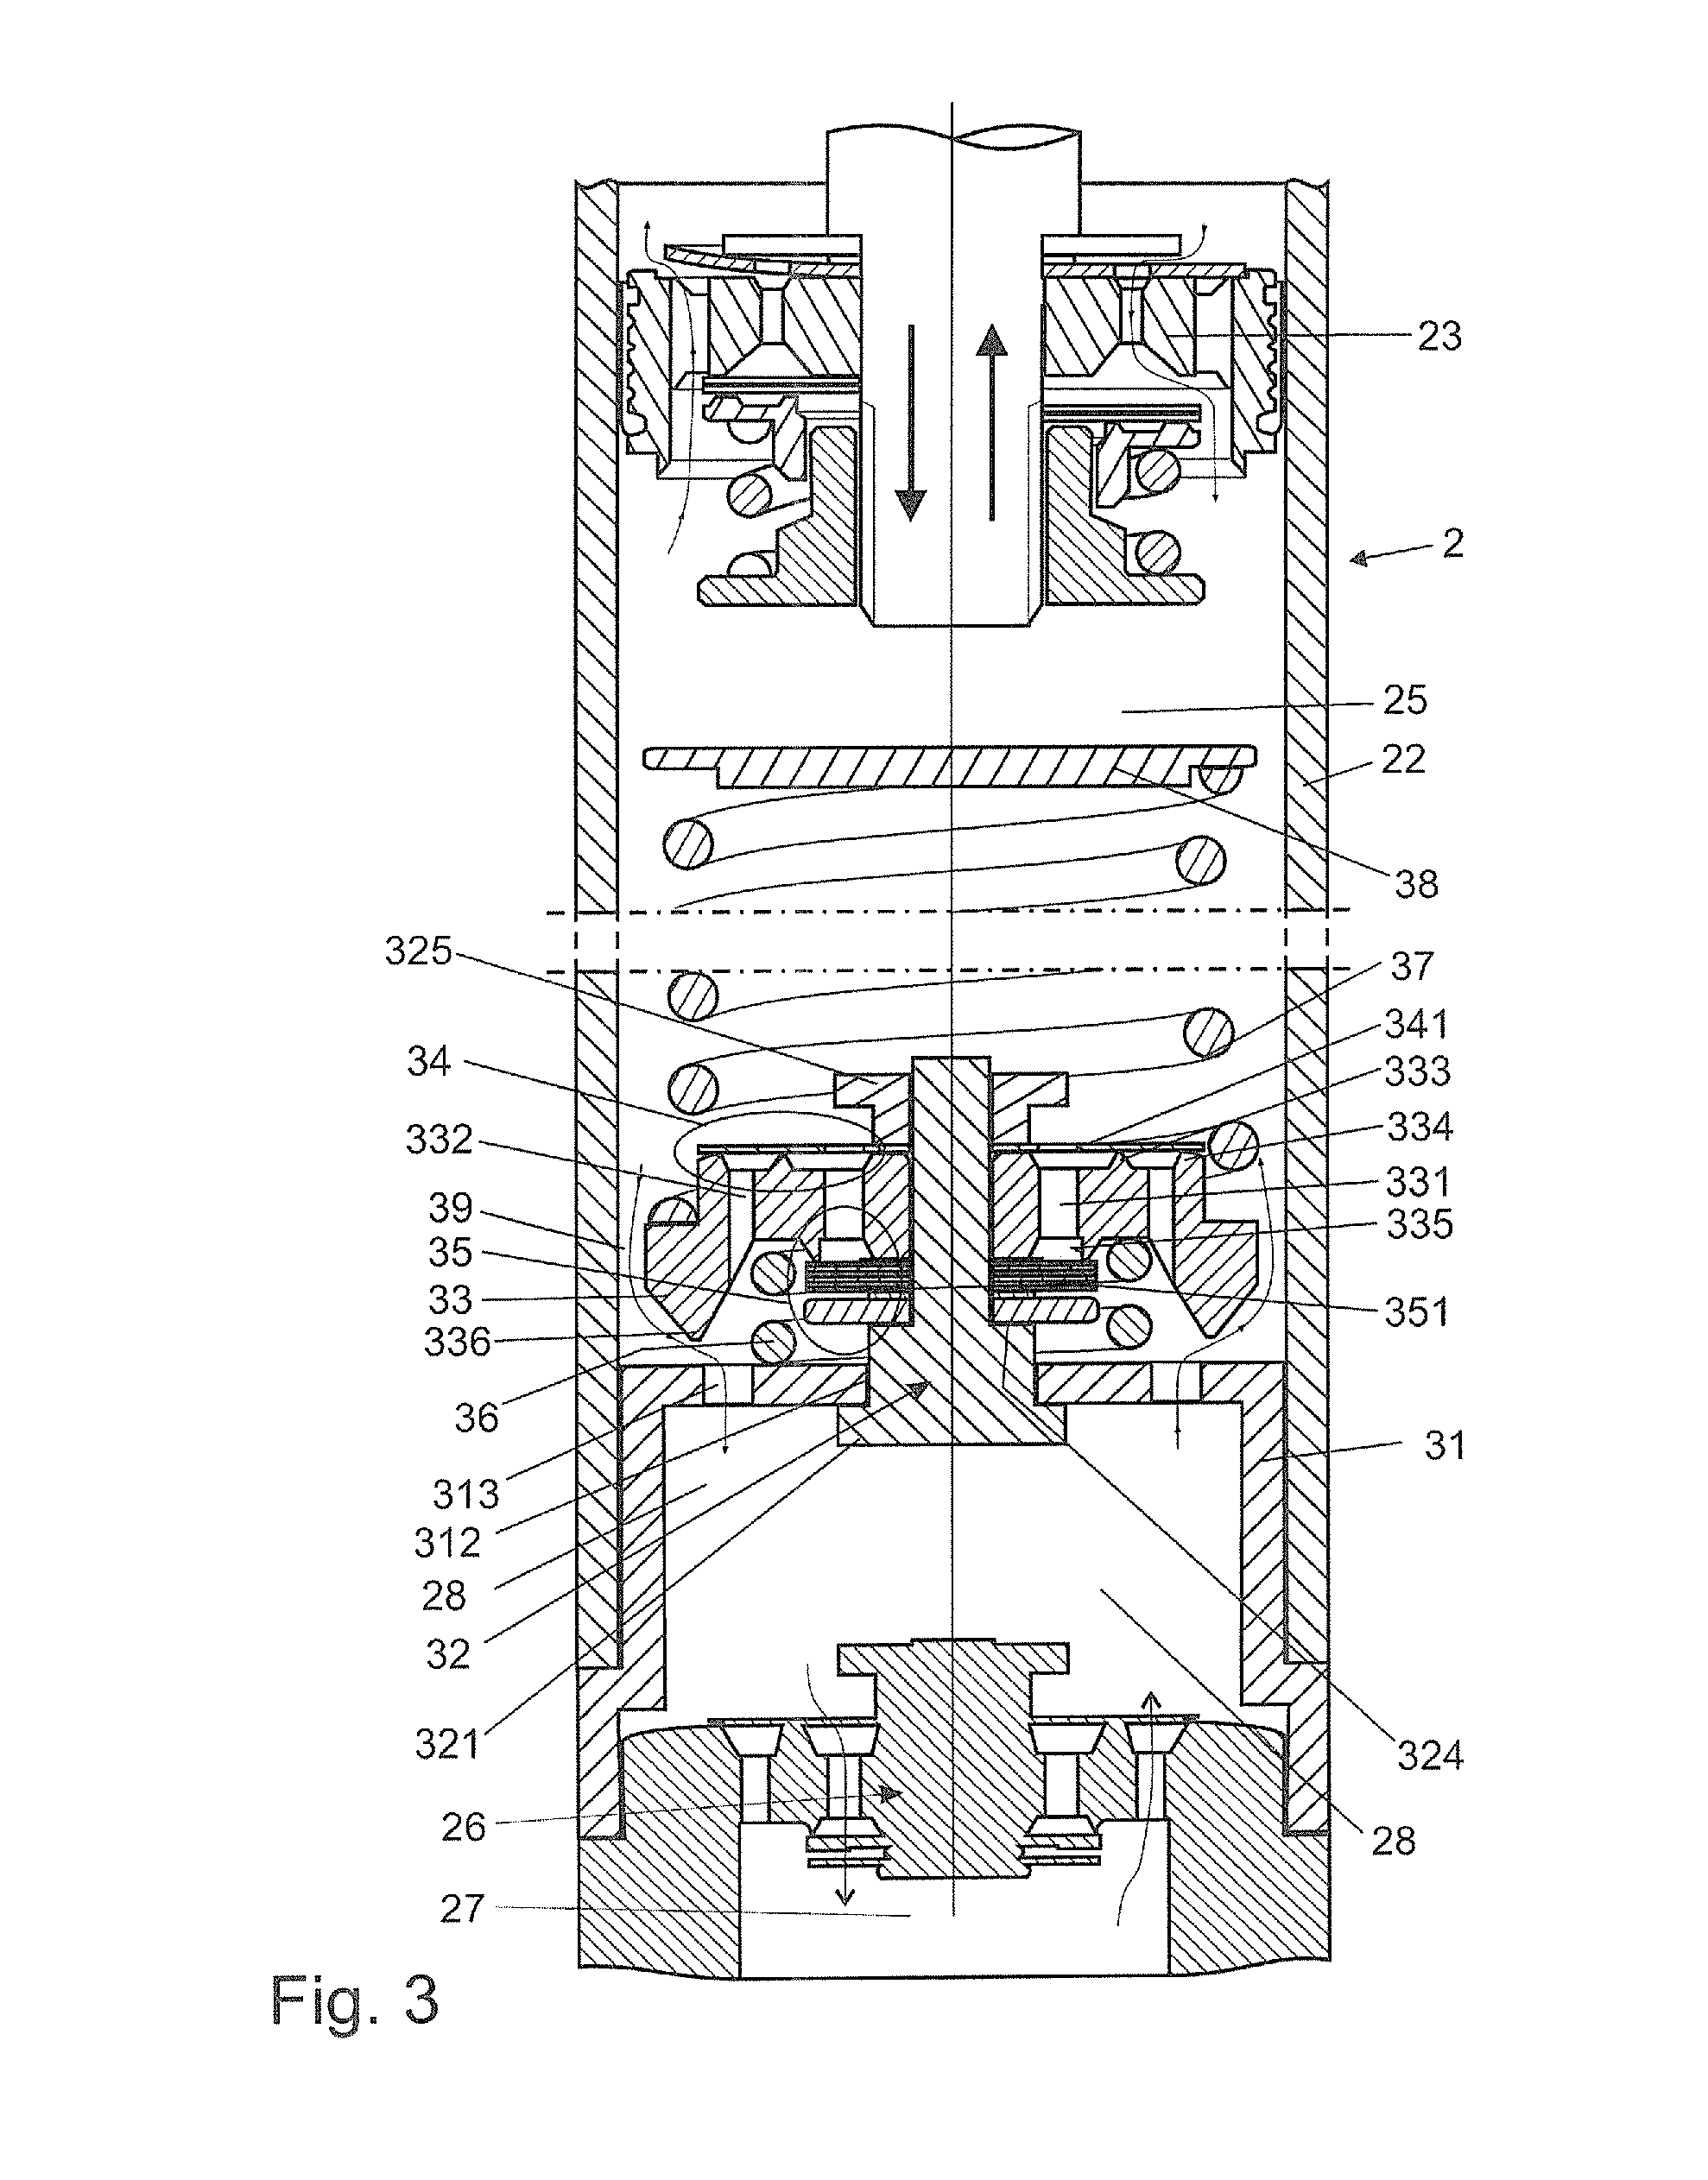 Hydraulic suspension damper with a position dependent damping assembly